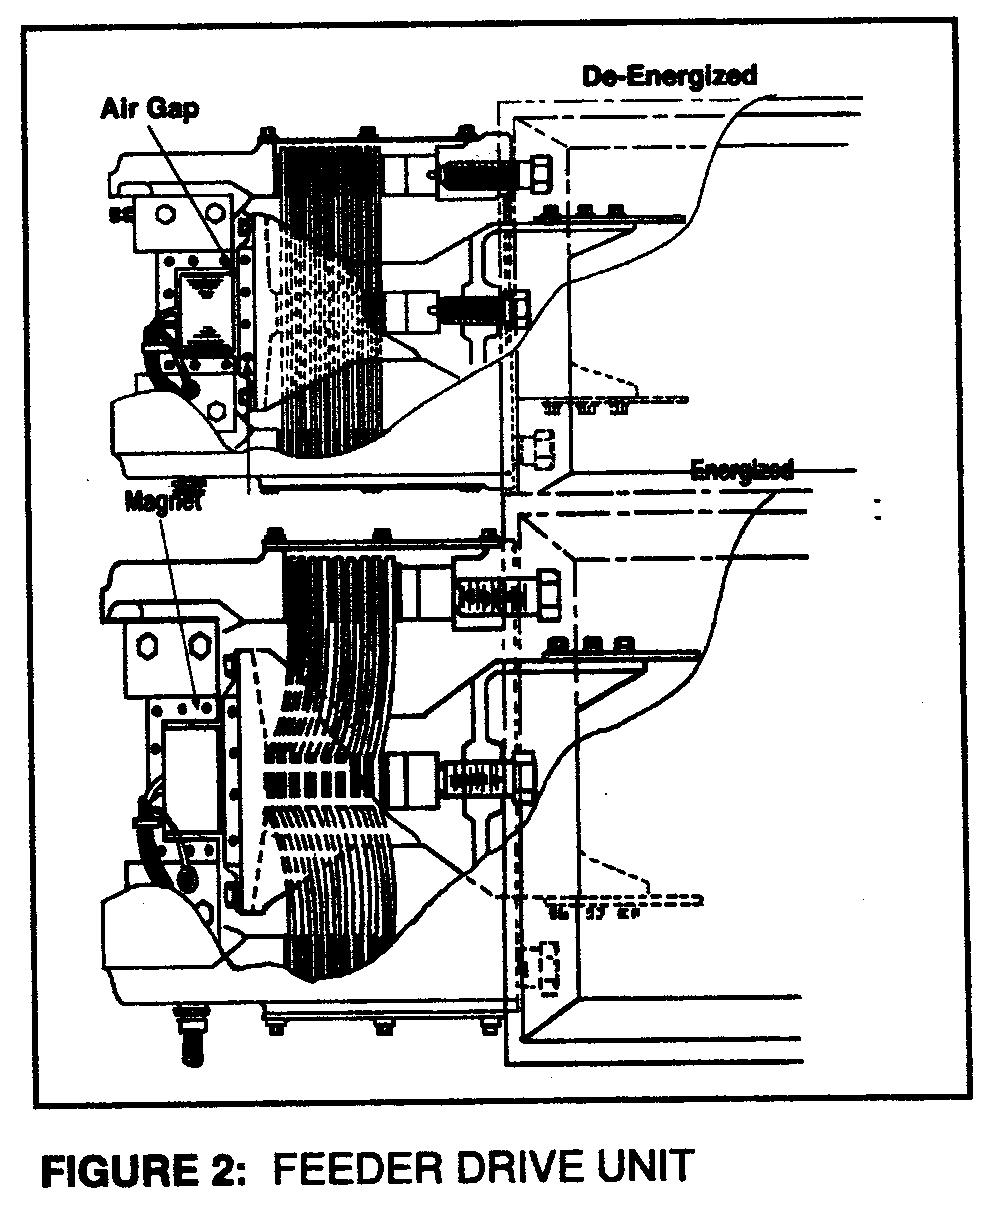 (See Figure 1) The drive assembly contains a coil and core assembly (magnet). This assembly is connected directly to the rear of the drive unit housing.